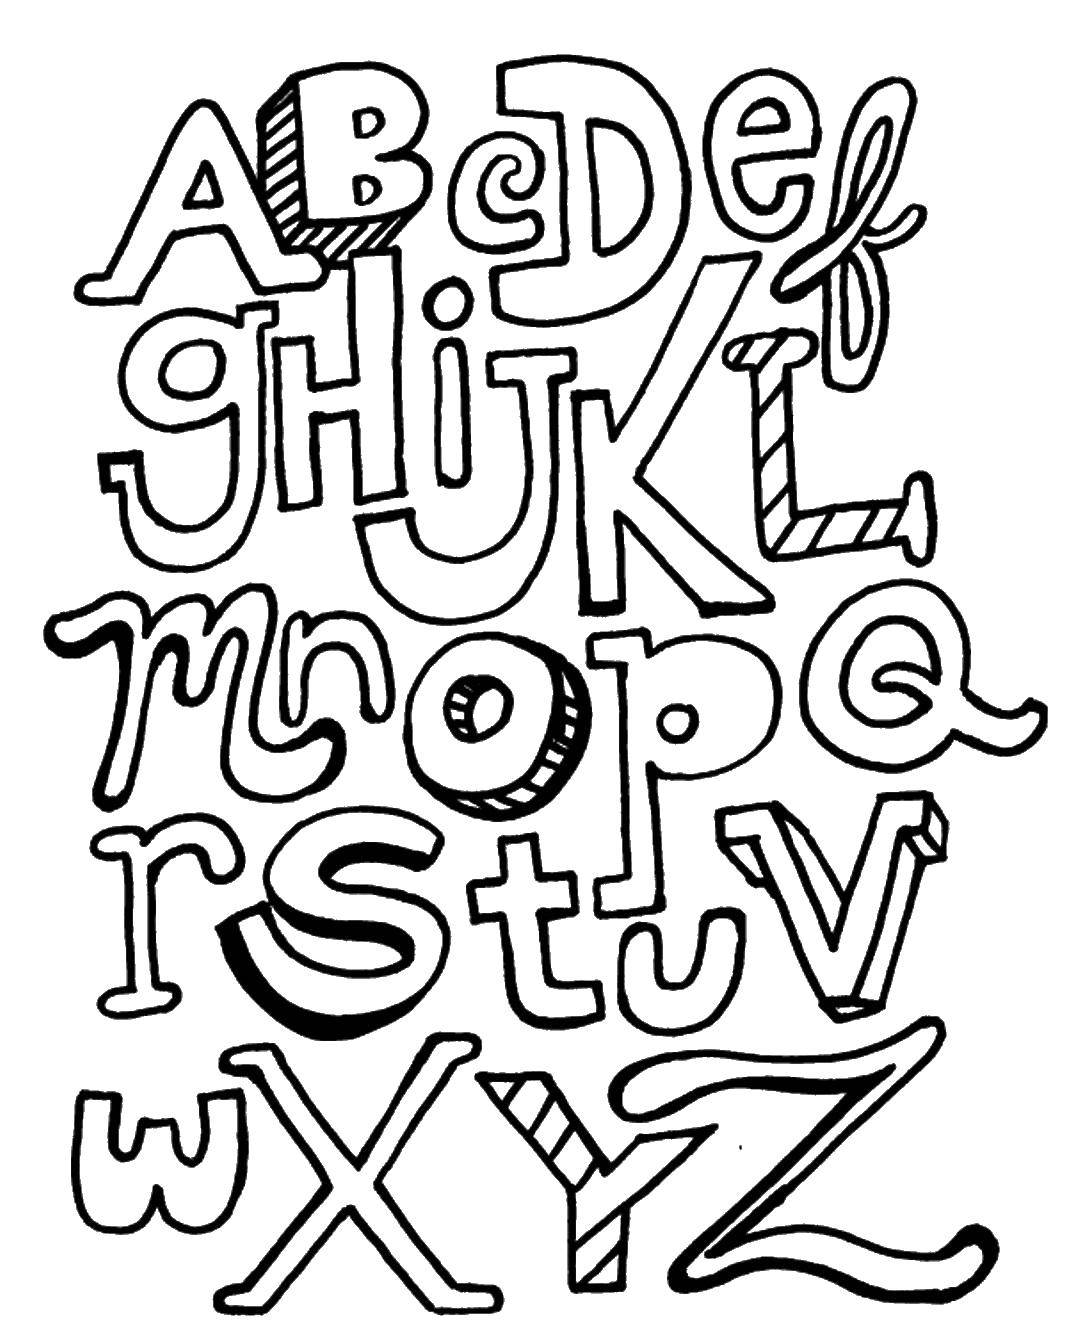 Coloring Funny alphabet. Category English alphabet. Tags:  The alphabet, letters, words.